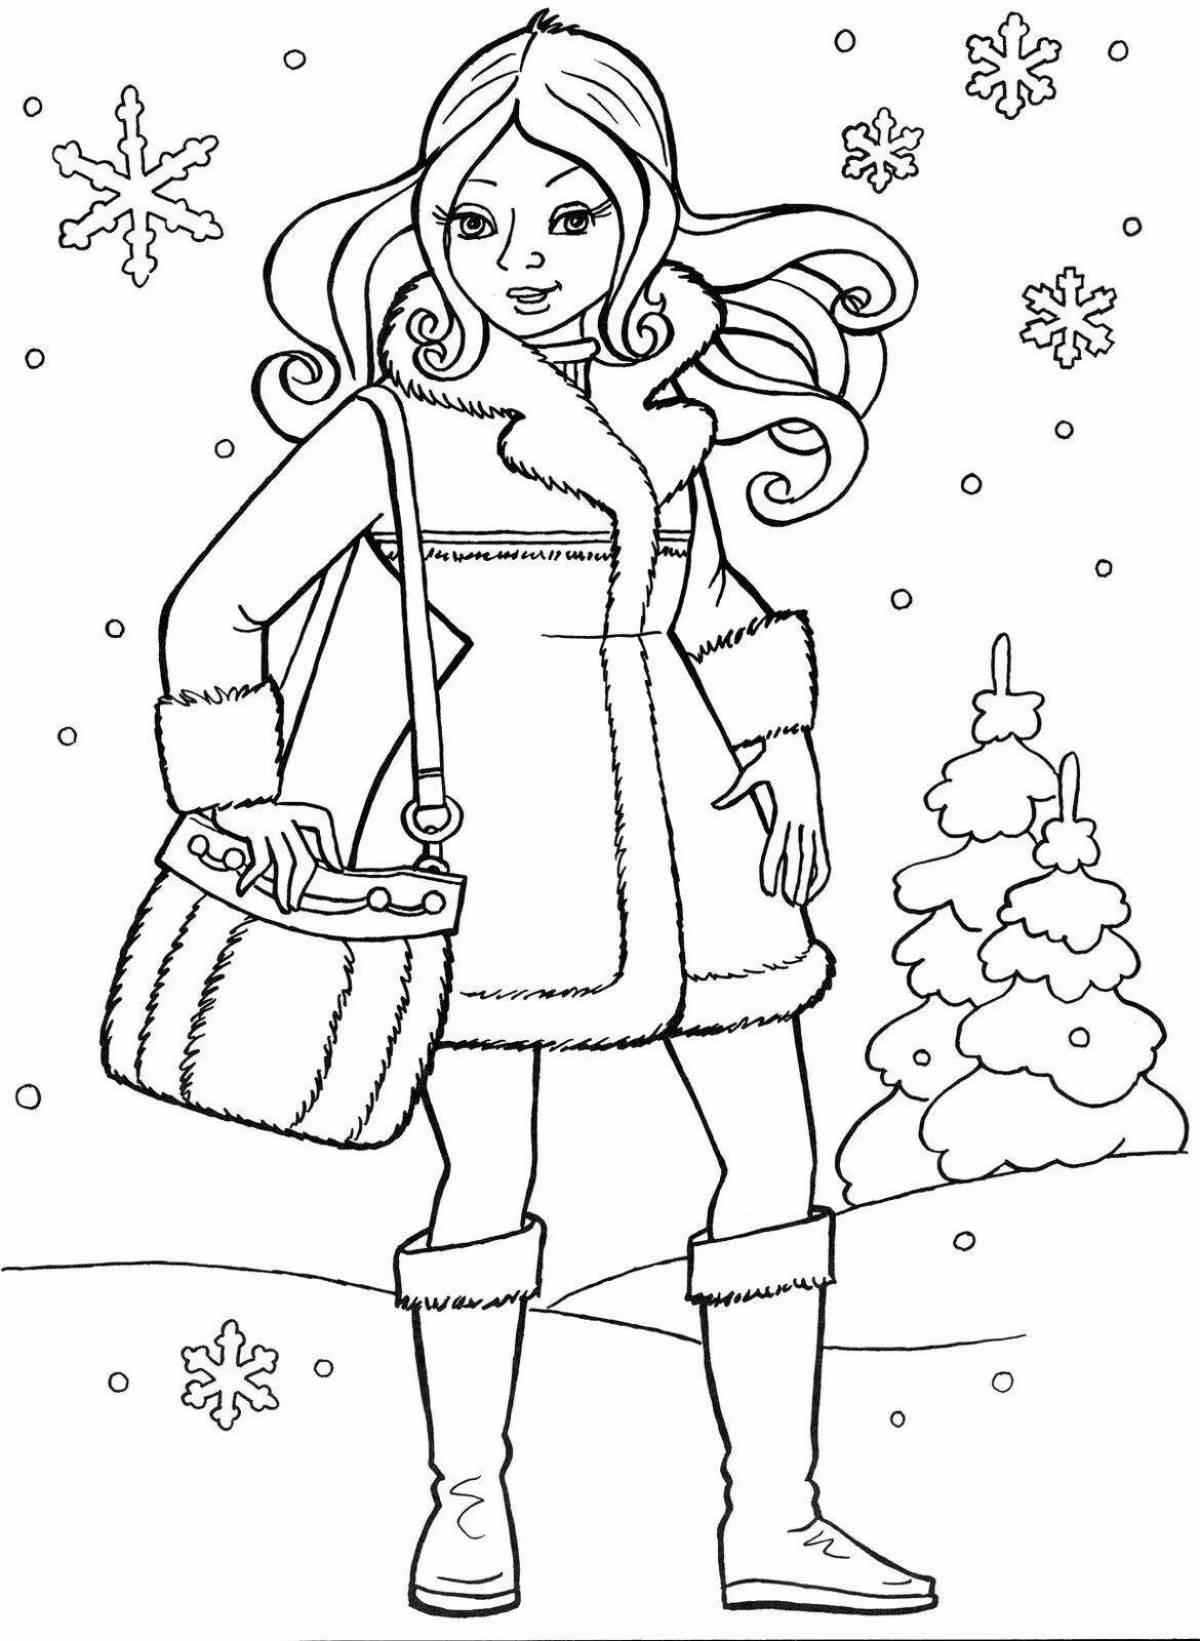 Delightful winter coloring book for girls